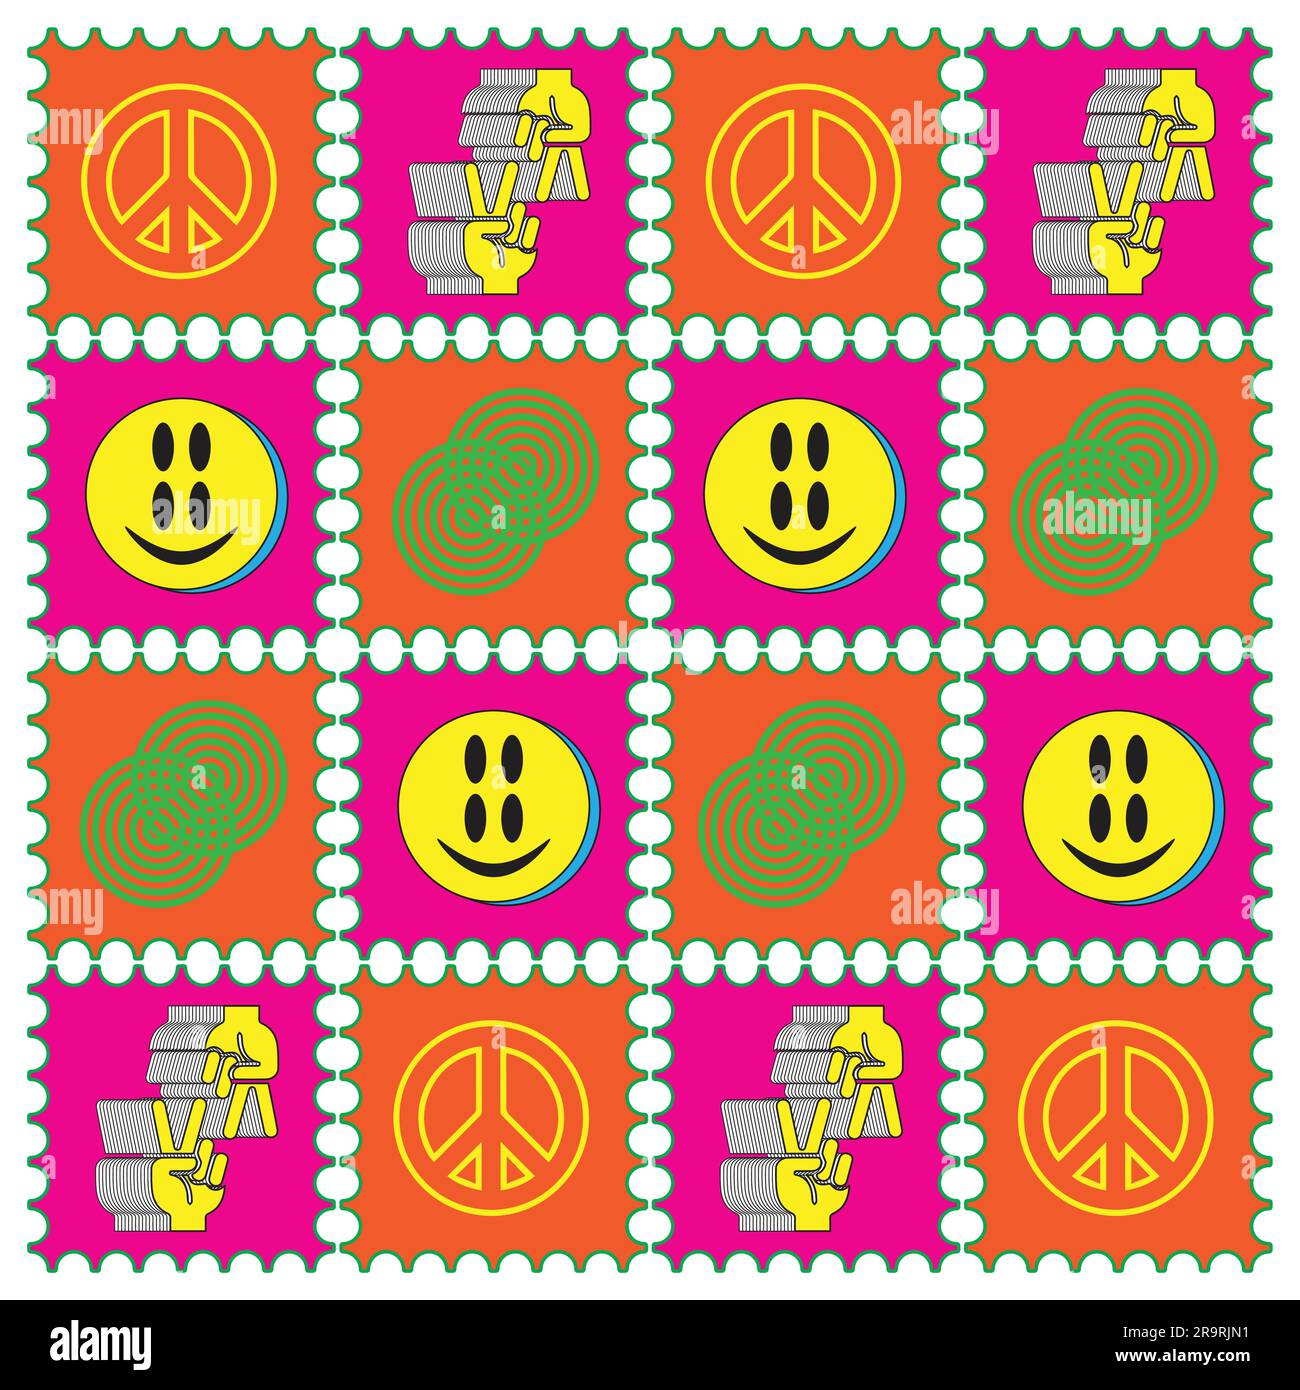 Acid lsd paper blotter mark trippy 60s style psychedelic geometry seamless pattern art.Vector crazy illustration.Smiley groovy faces,magic mushrooms Stock Vector